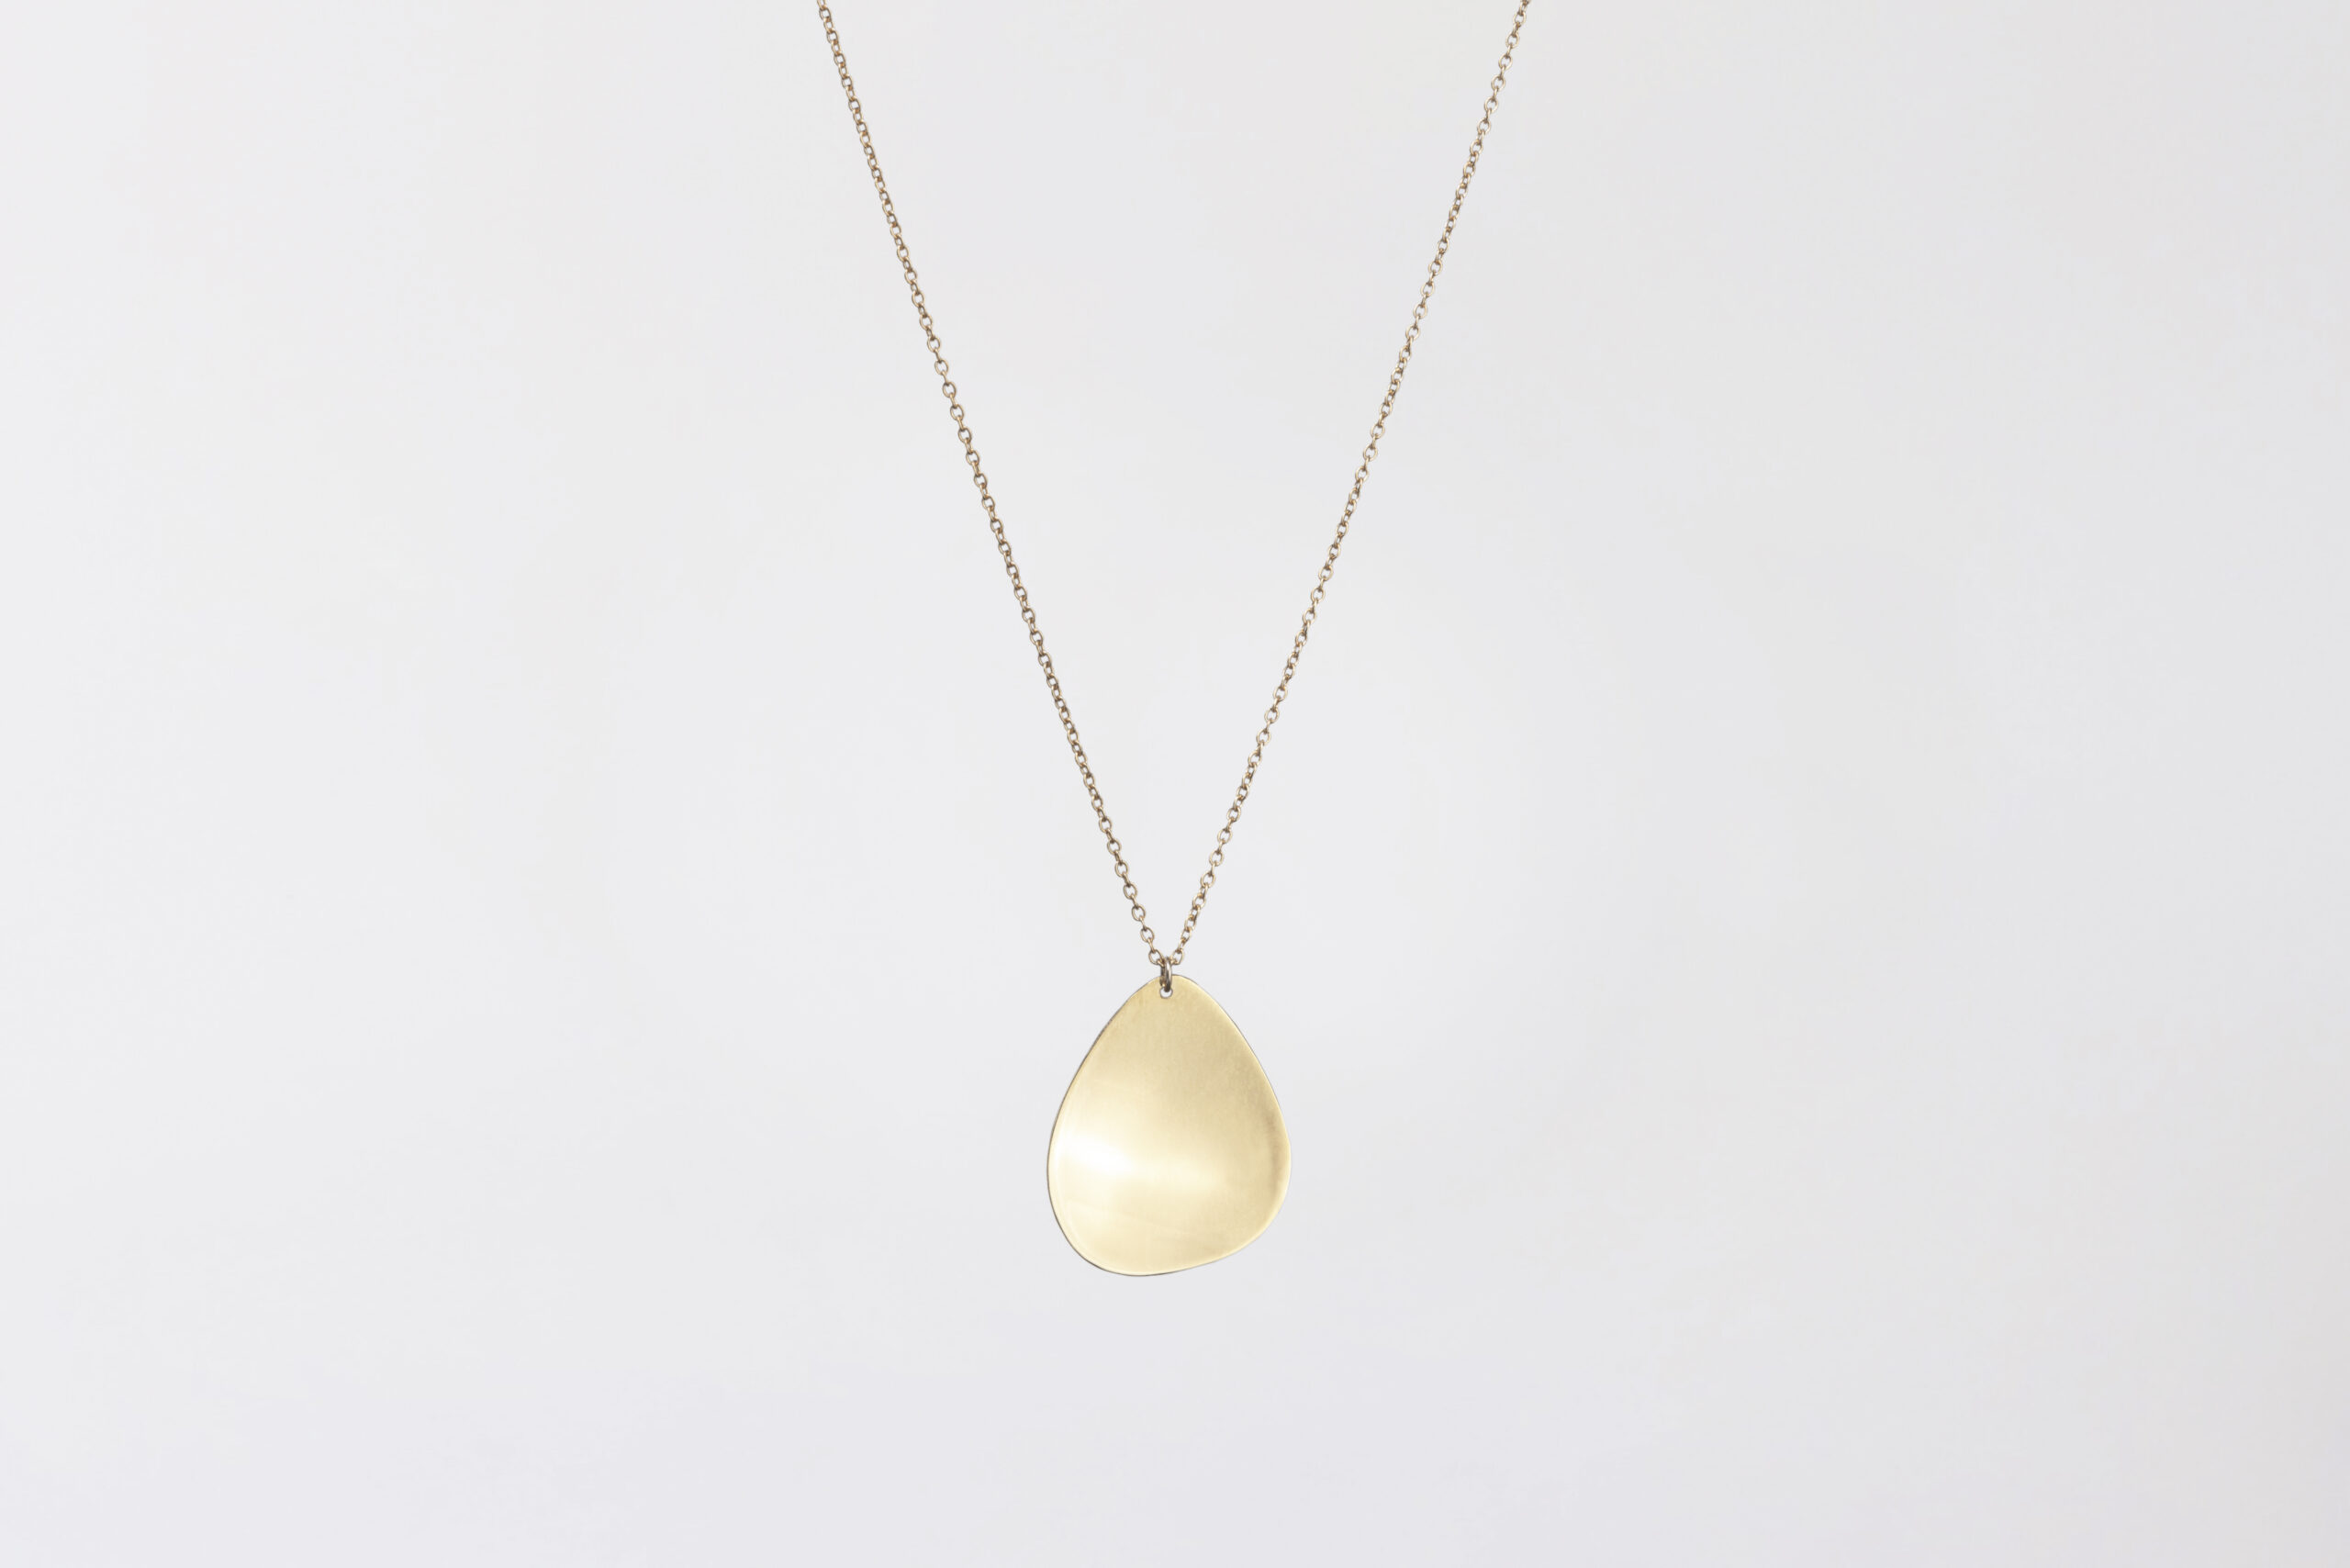 Sustainable ethical bridal Singö necklace with matte 14K gold plating